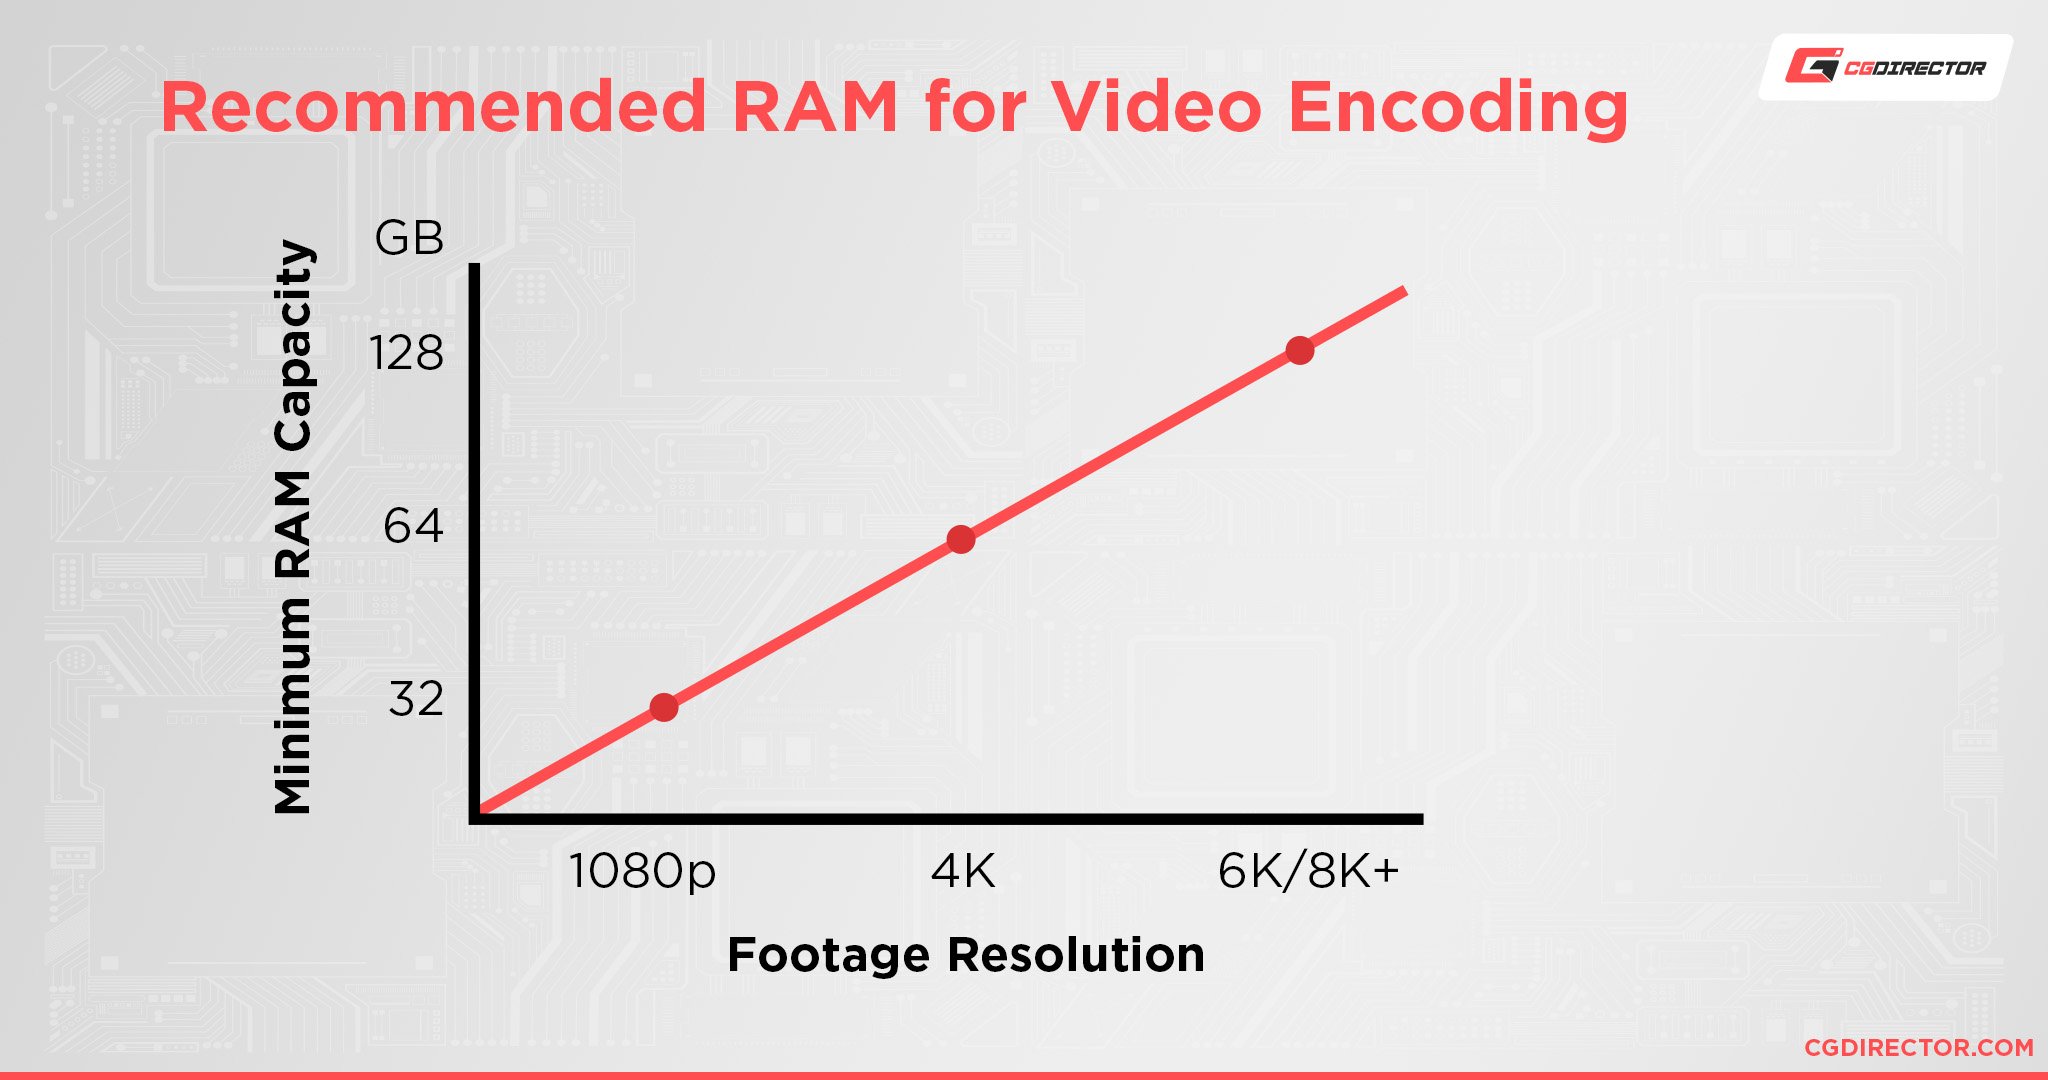 Recommended RAM for Video Editing